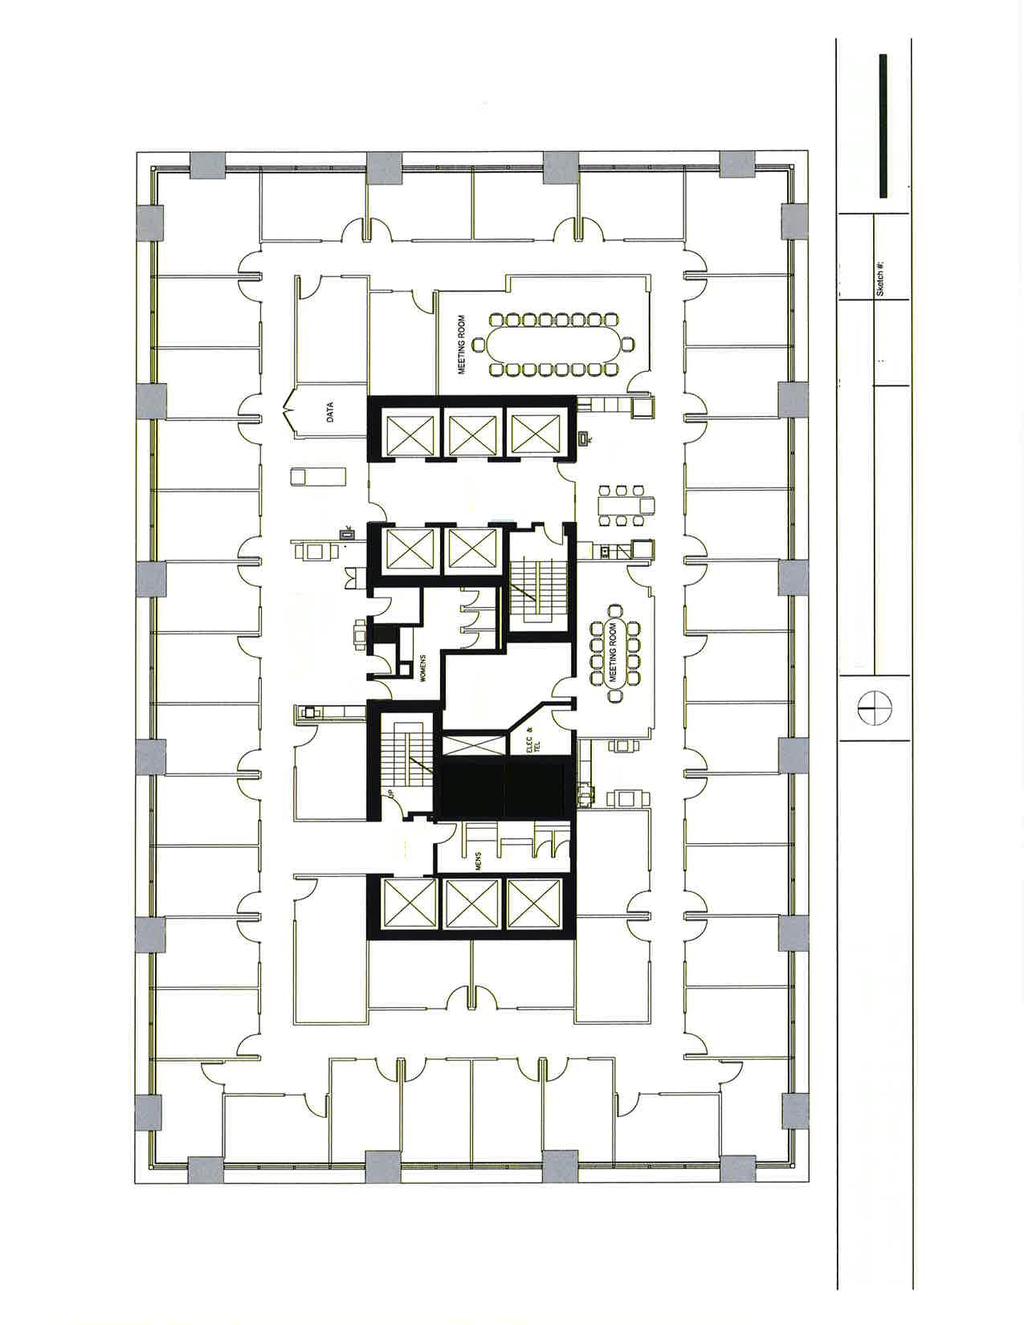 lounges BOW VALLEY SQUARE IV - FLOOR 7 11,516 SQUARE FEET capacity 43 > > 36